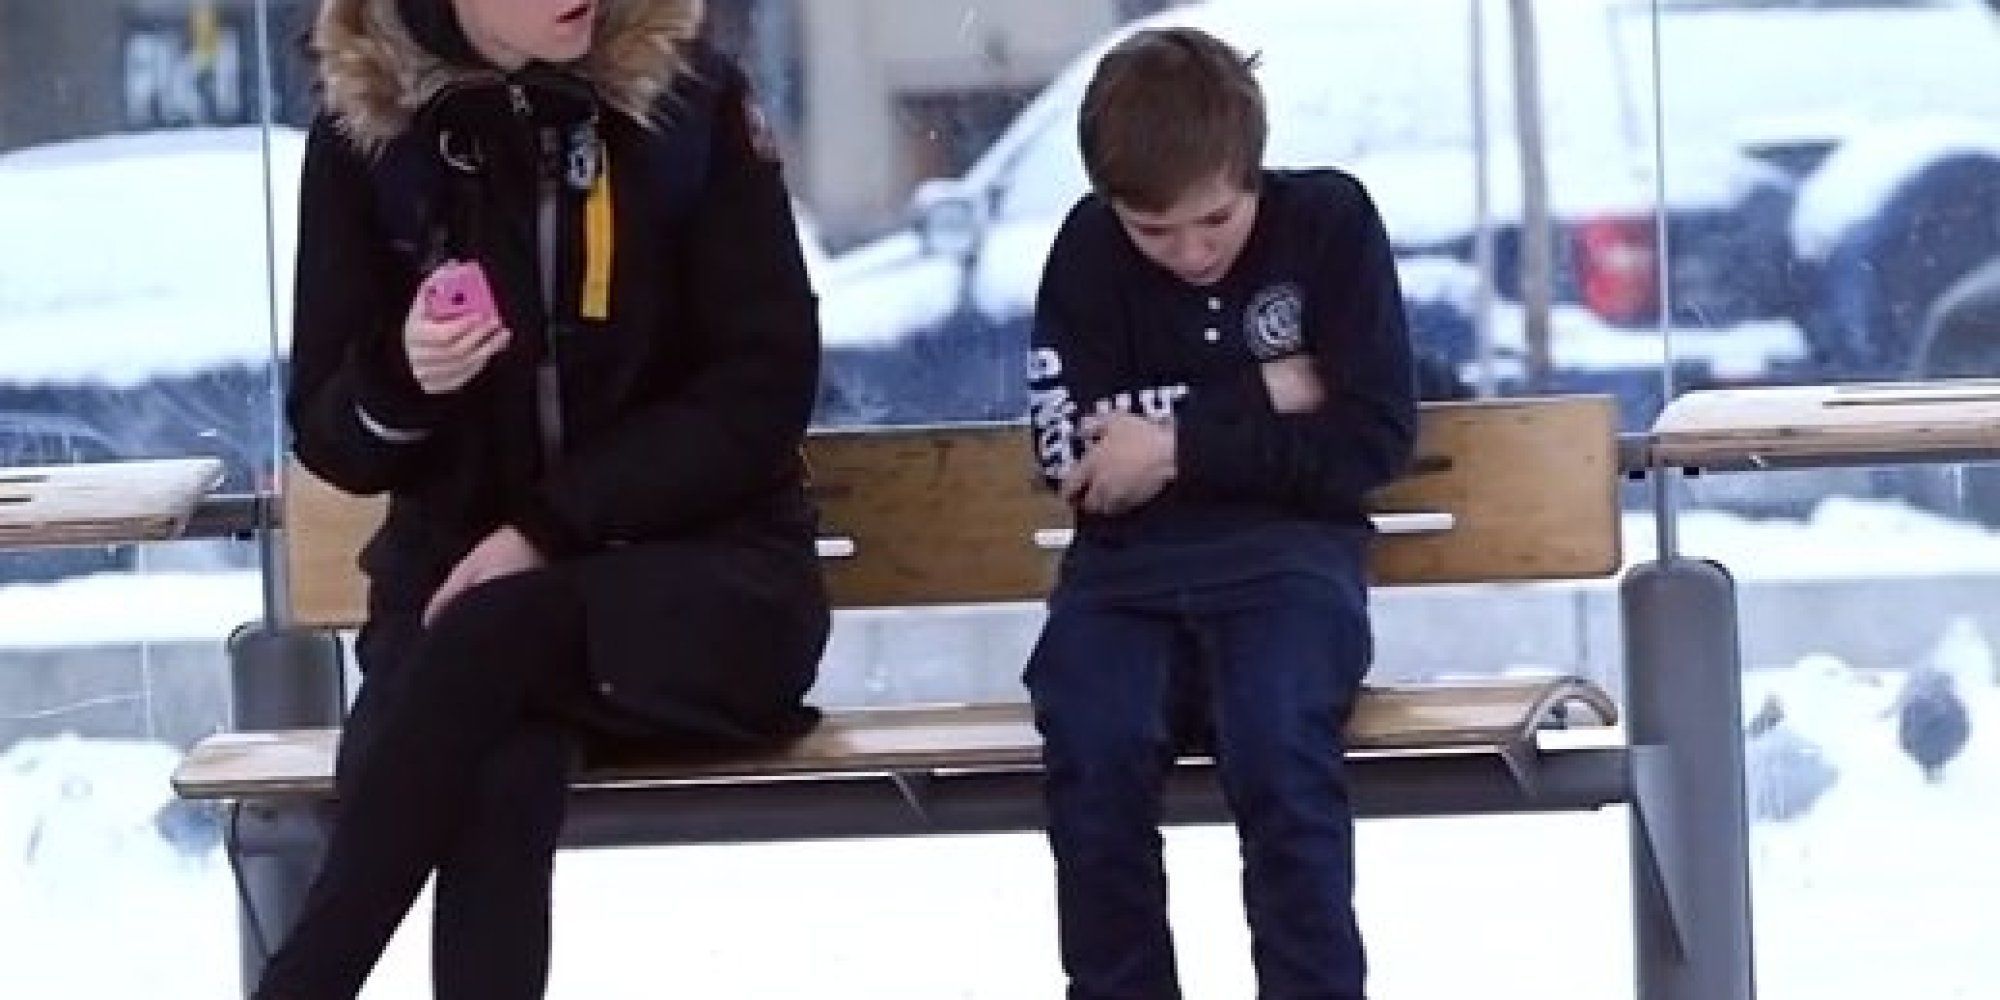 what happened when strangers saw a little boy shivering outside with a coat